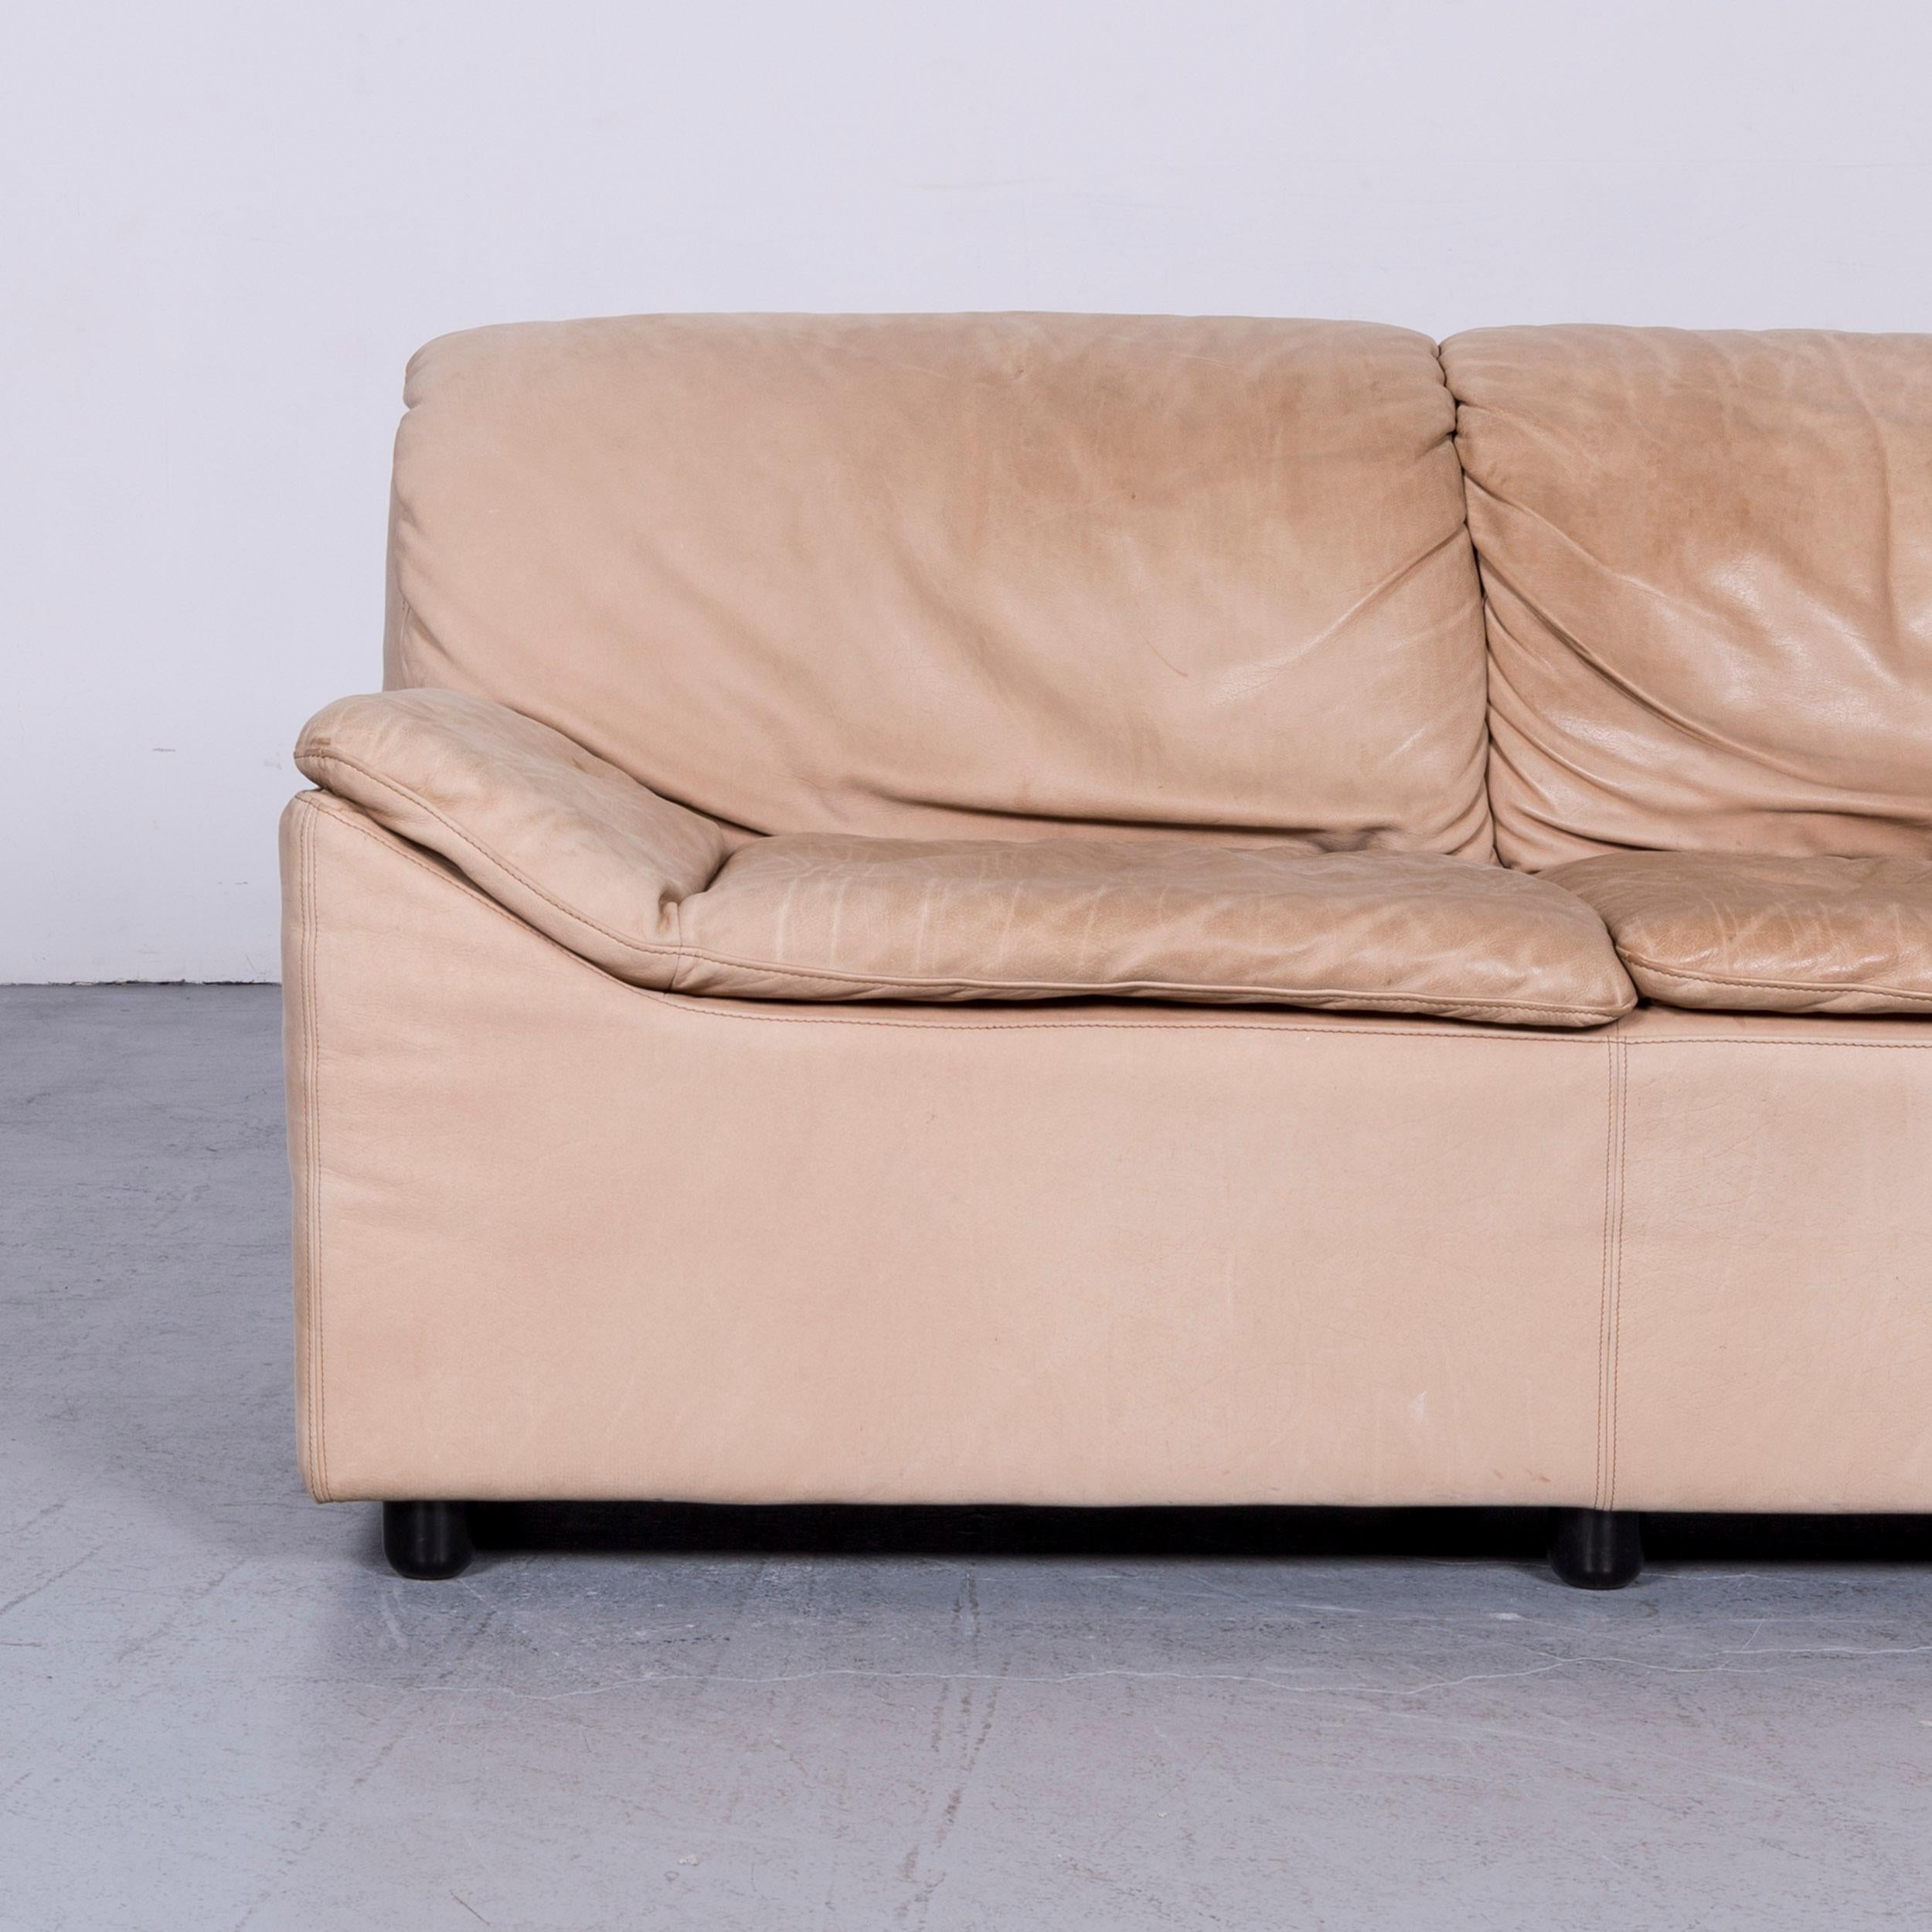 German Kill International Golf Designer Sofa Leather Beige Three-Seat Couch from 1984 For Sale